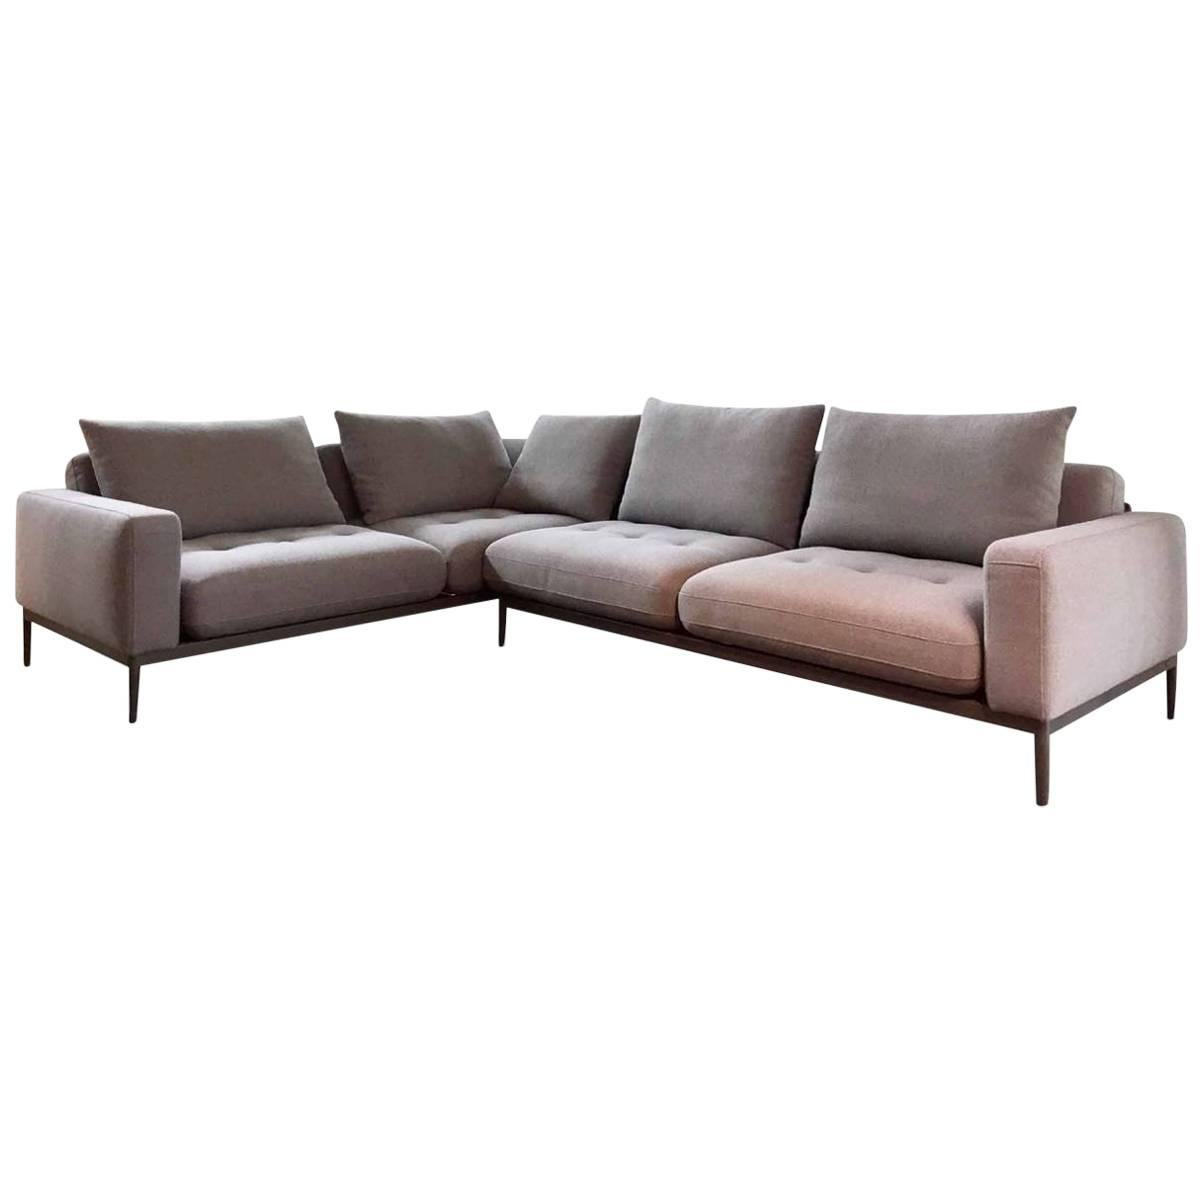 L-Sofa "Tira" by Manufacturer Rolf Benz in Metal Finished in Fabric